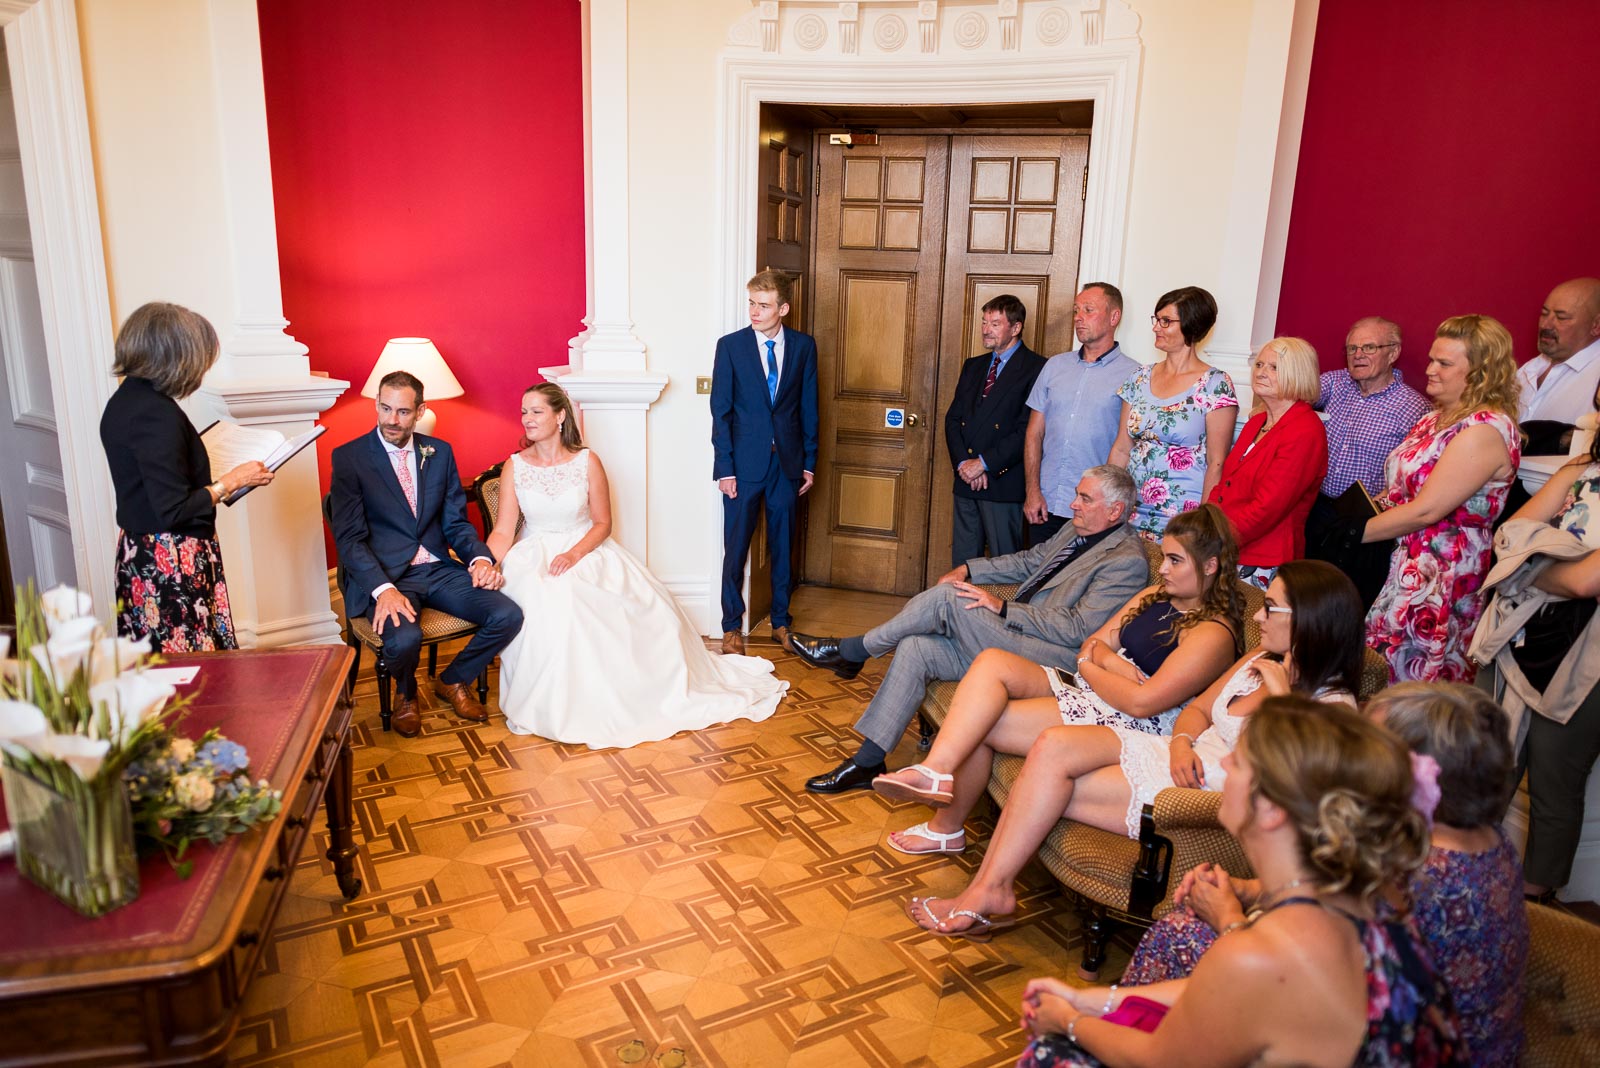 Donna and Andy surrounded by guests at their wedding in Eastbourne Town Hall.